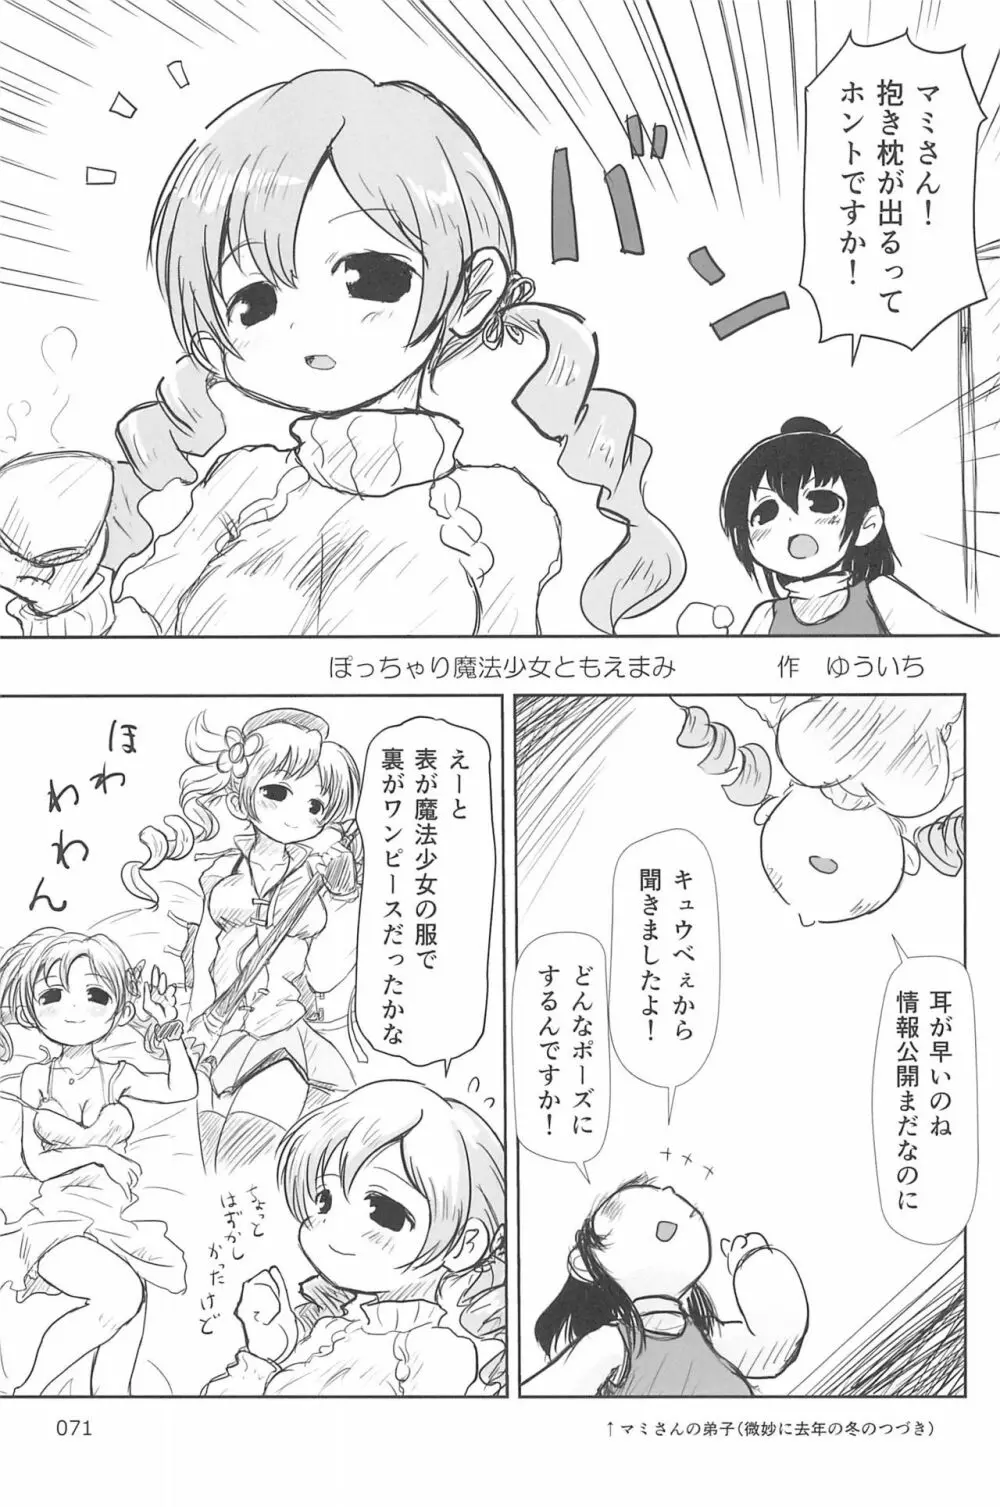 ND-special Volume 6 71ページ